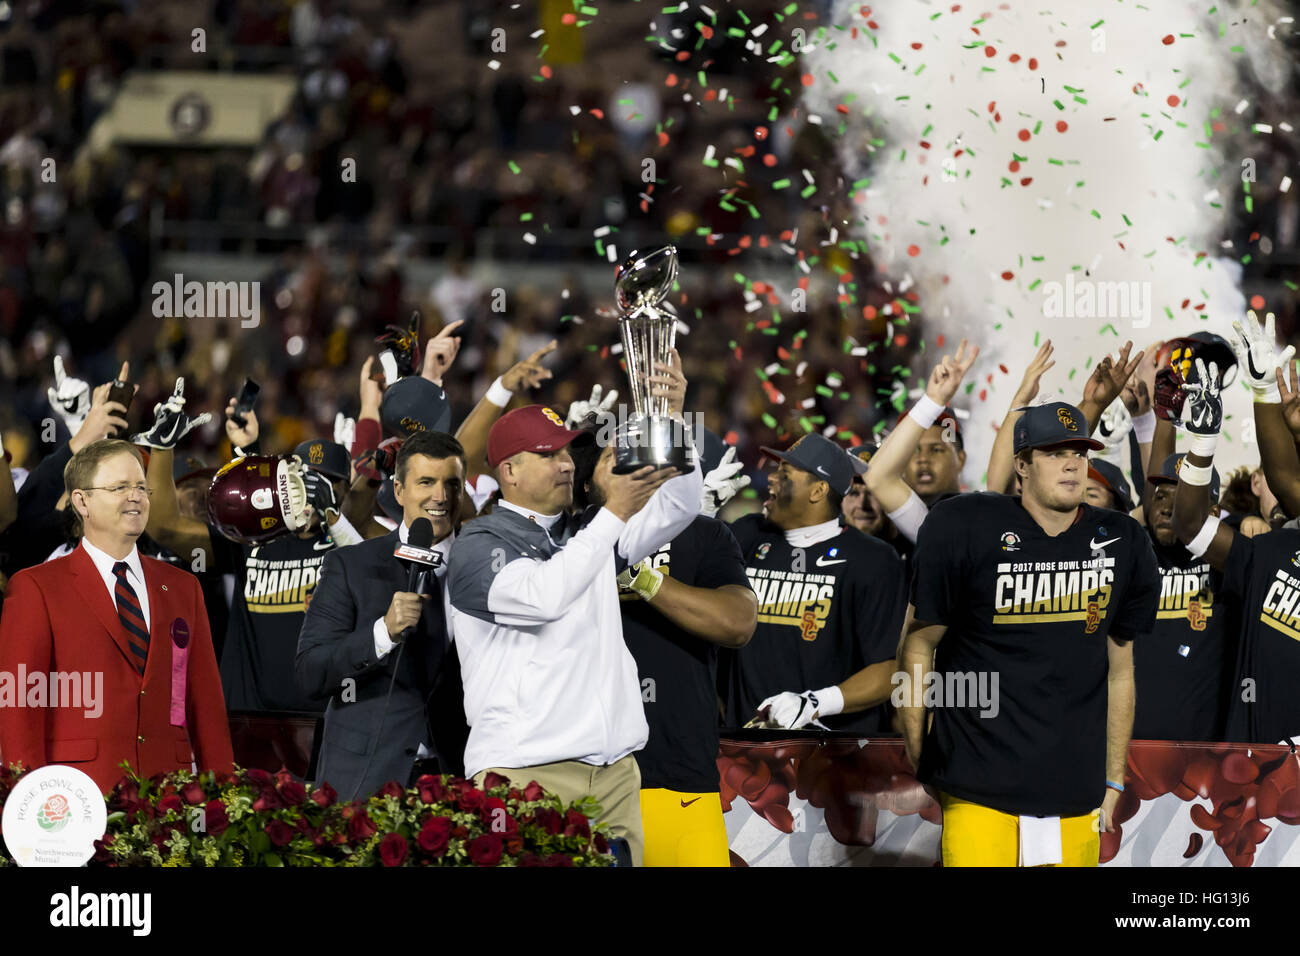 California, USA. 2nd Jan, 2017.  USC head coach Clay Helton holds the Leishman Trophy after the Rose Bowl Game between Penn State Nittany Lions and University of Southern California Trojans at Rose Bowl Stadium in Pasadena, California. USC won 52-49. © Scott Taetsch/ZUMA Wire/Alamy Live News Stock Photo